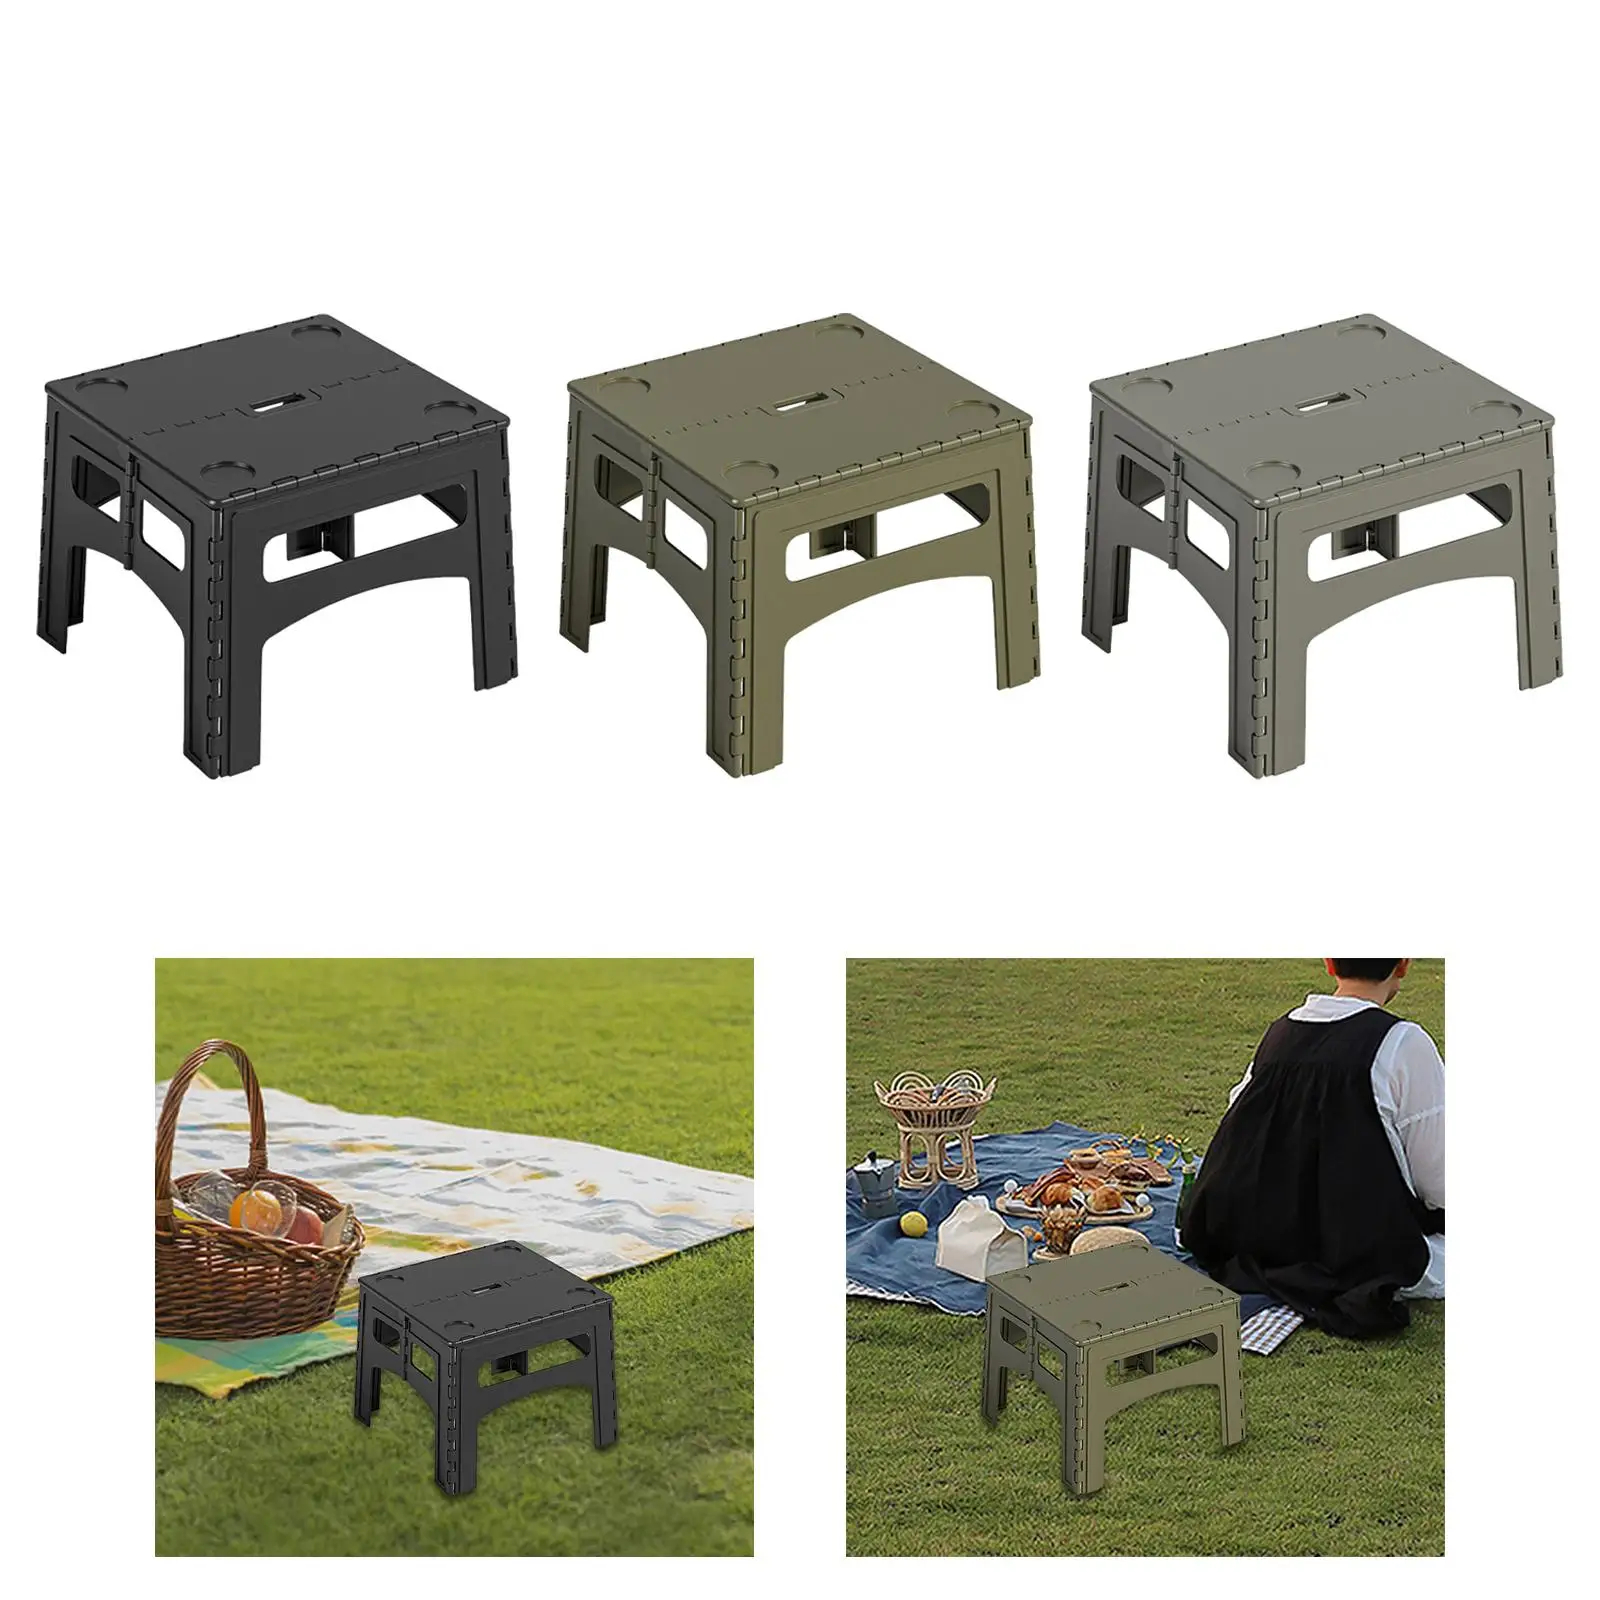 Outdoor Folding Table Camping Table Picnic Dining Table Furniture Portable Foldable Picnic Table for Party, Picnic, Outdoors